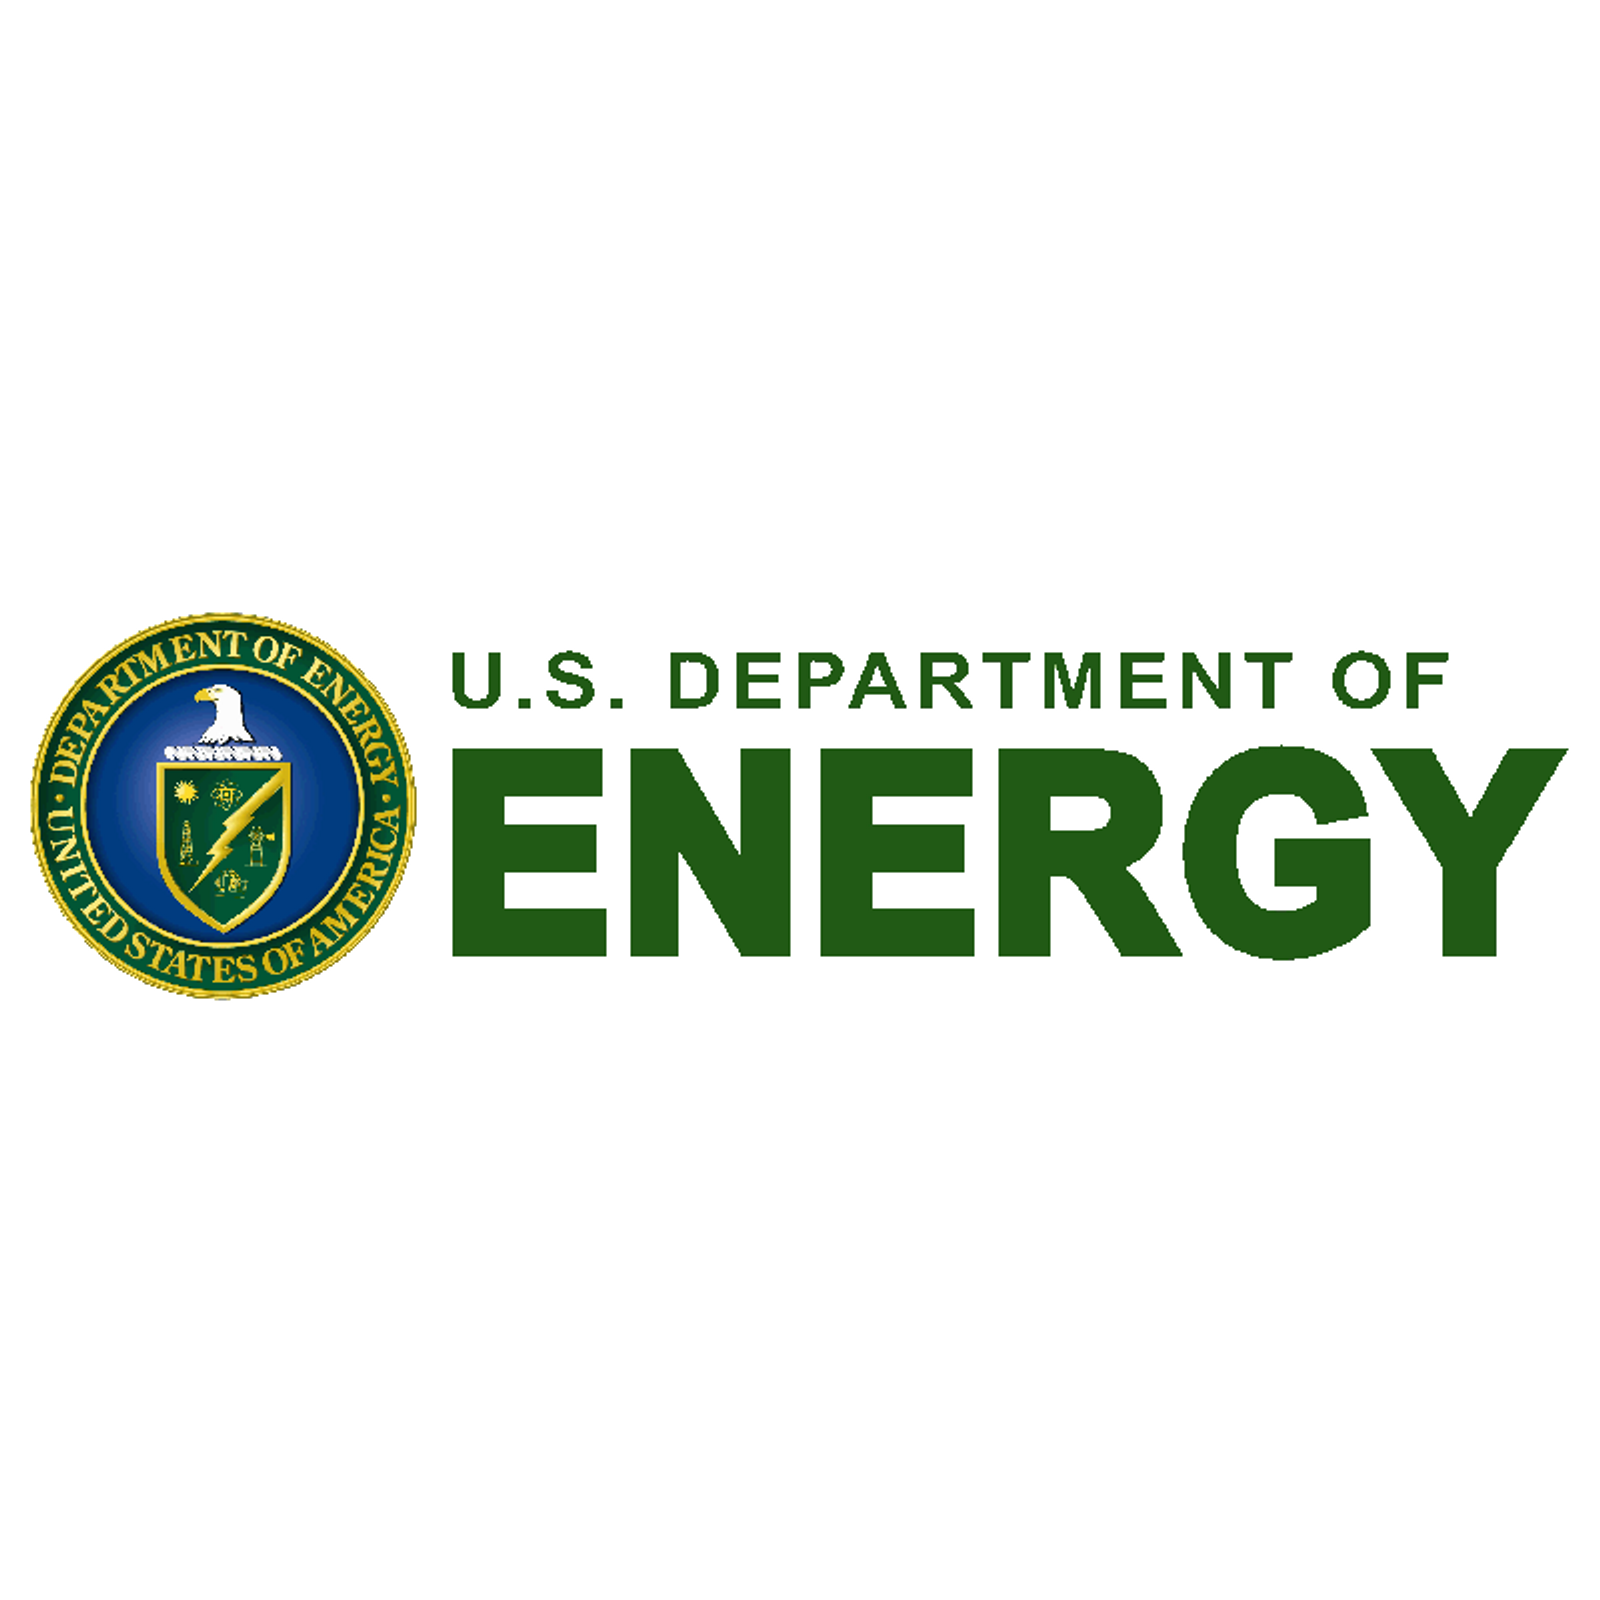 The U.S. Department of Energy (DOE) extended Eagle LNG’s #Export Term for Authorizations to Free Trade and Non-Free Trade Agreement Nations through December 31, 2050